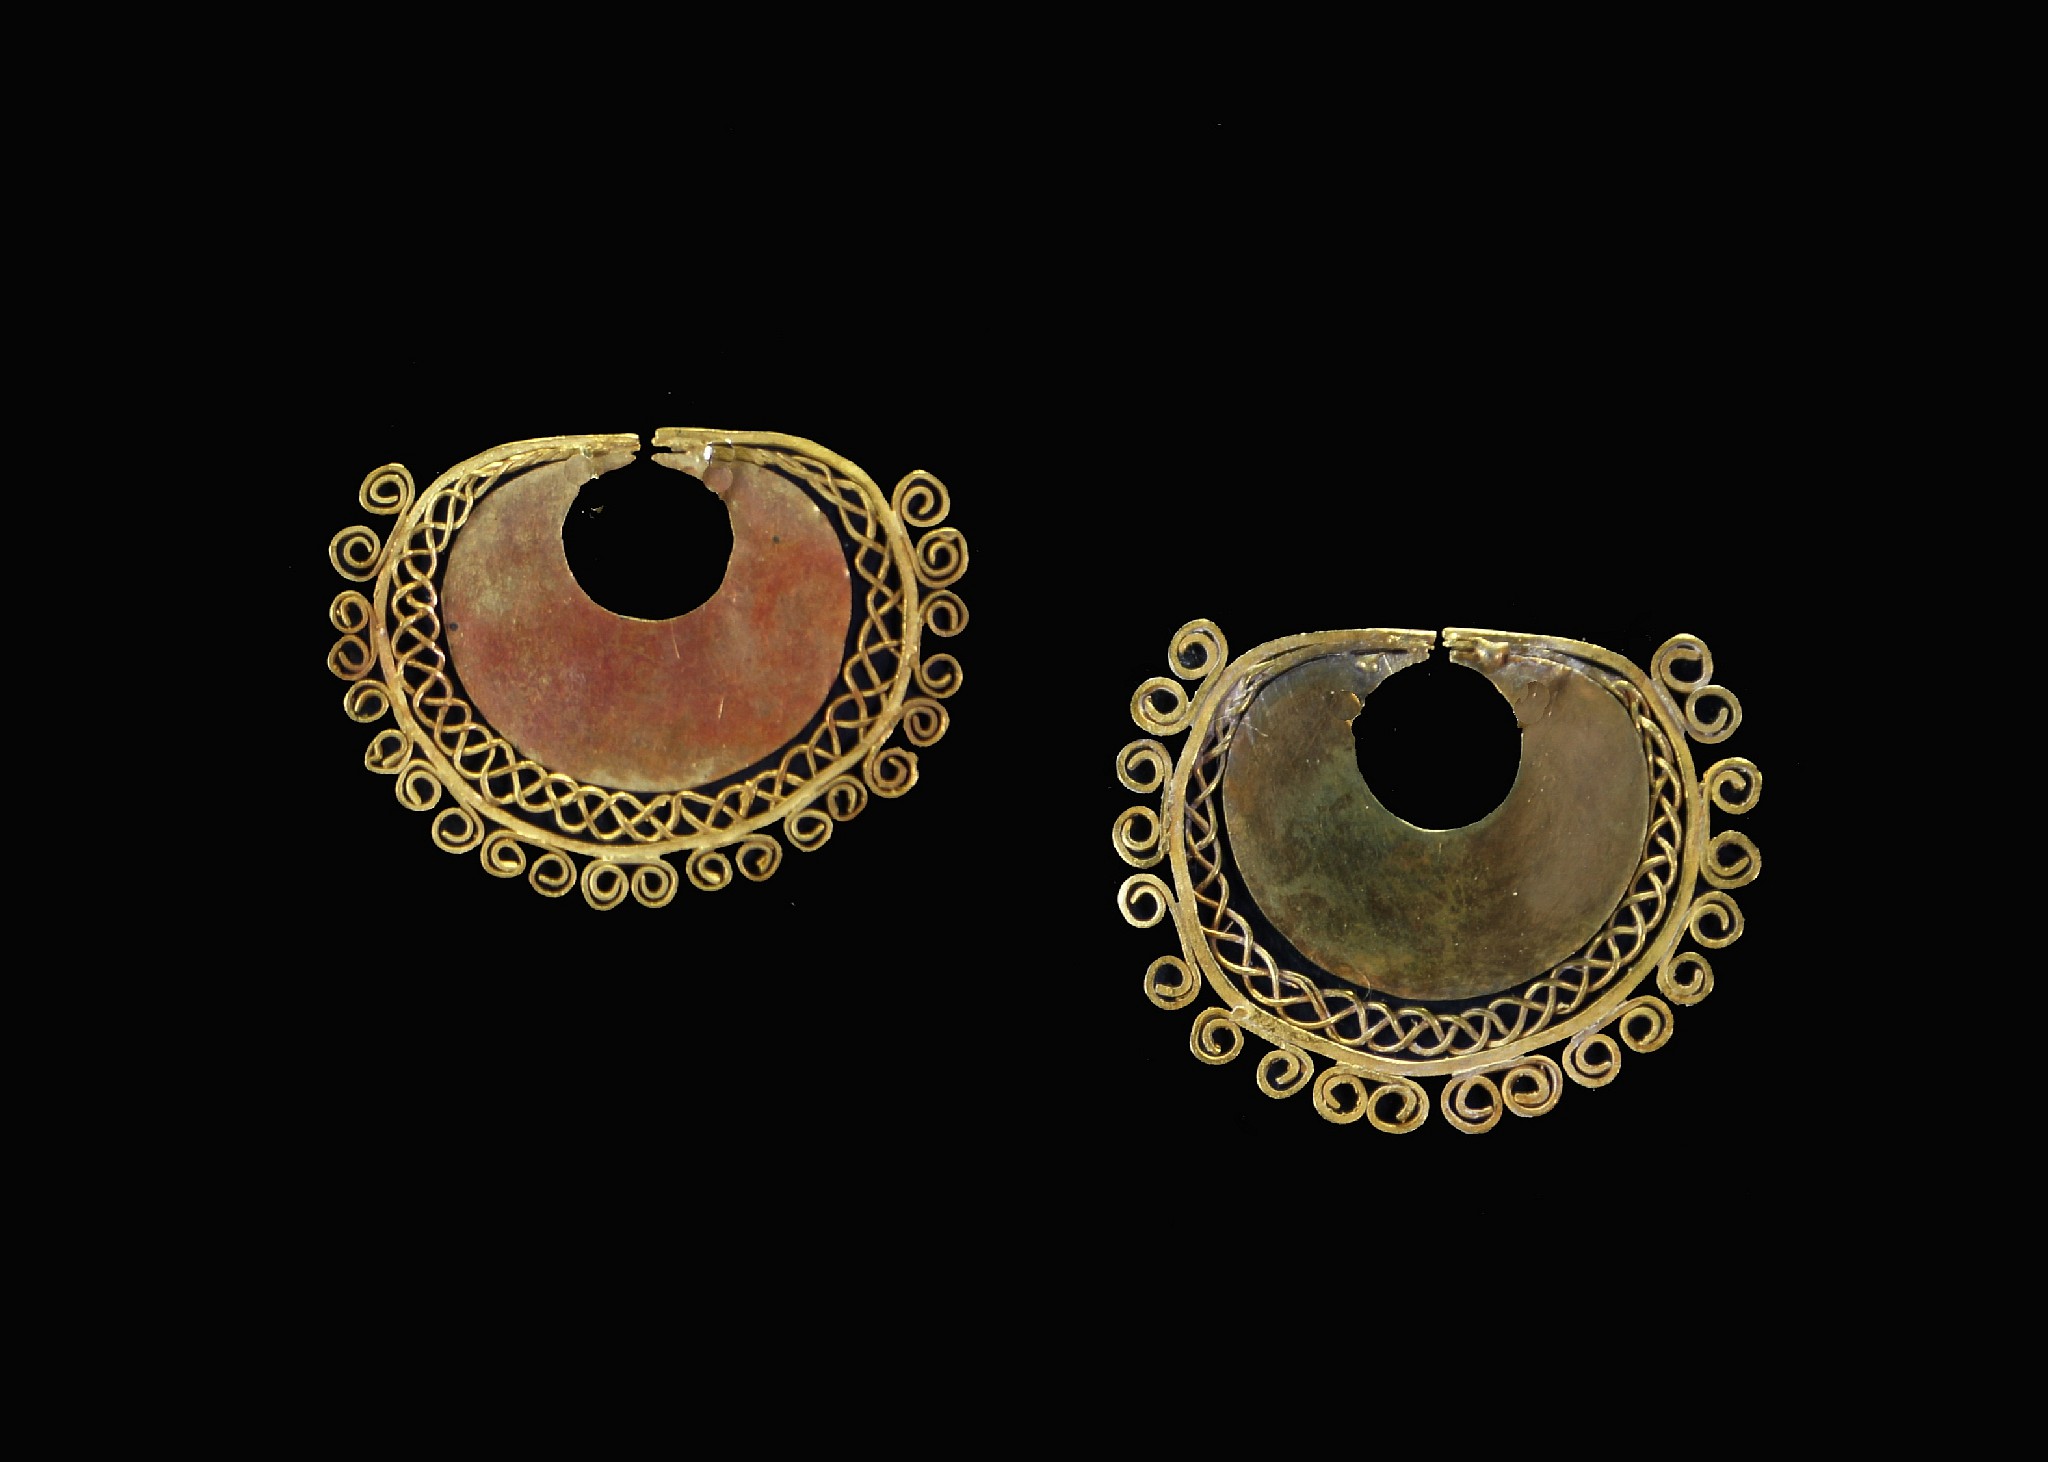 Peru, Early Nasca Gold Pair of Earrings with Filigree Decoration
A matched set of Nasca gold earrings with true filigree work and original archaeological patina.   The wire is skillfully soldered to the central disc.
Media: Metal
Dimensions: Width 1 3/8"     Weight: 3.8 grams
Price Upon Request
87044